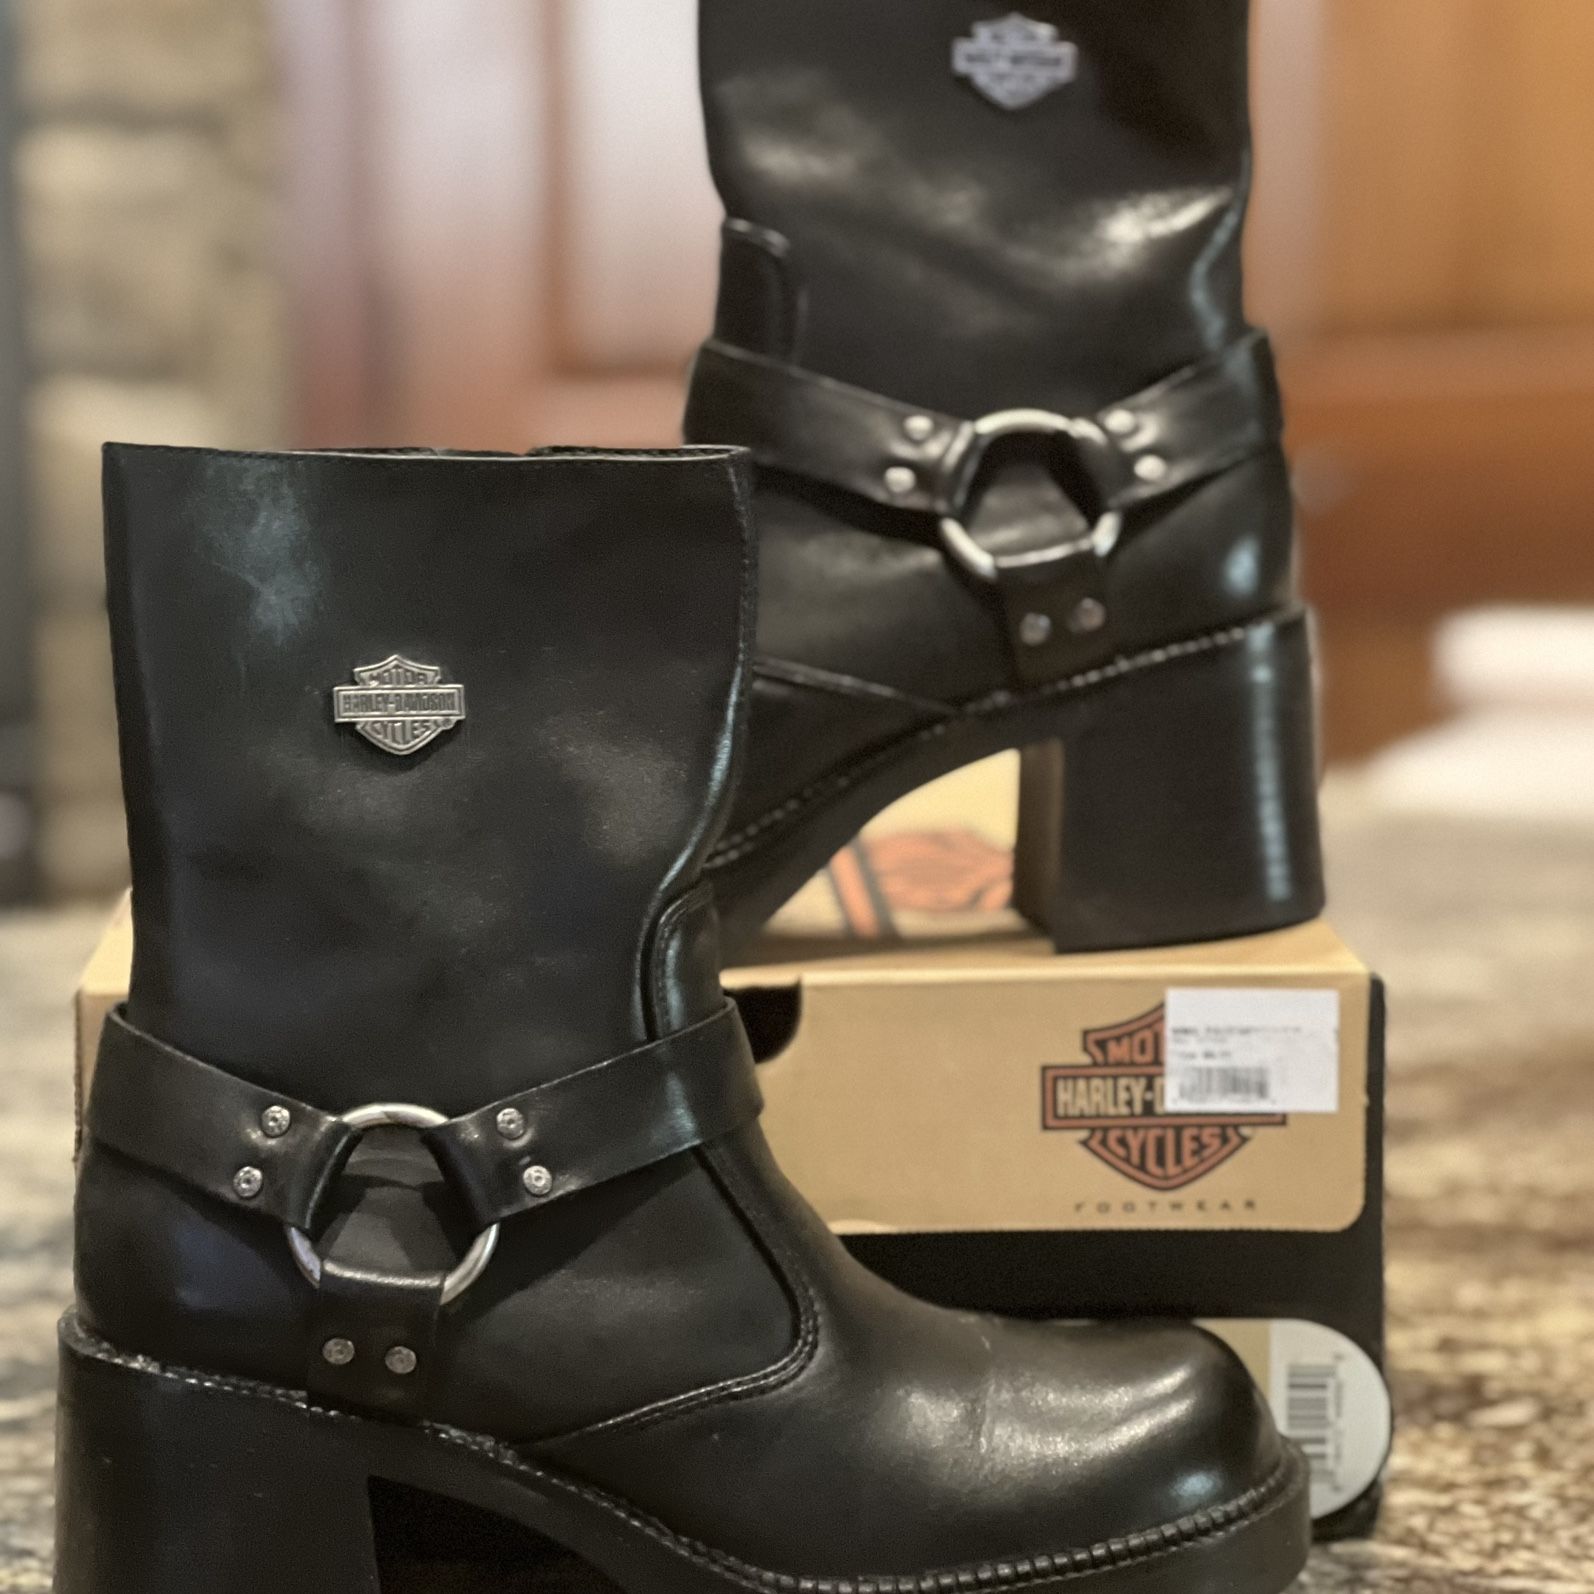 Harley Davidson Women’s Boots - Vintage Pavement Harness Black Leather Riding Boots